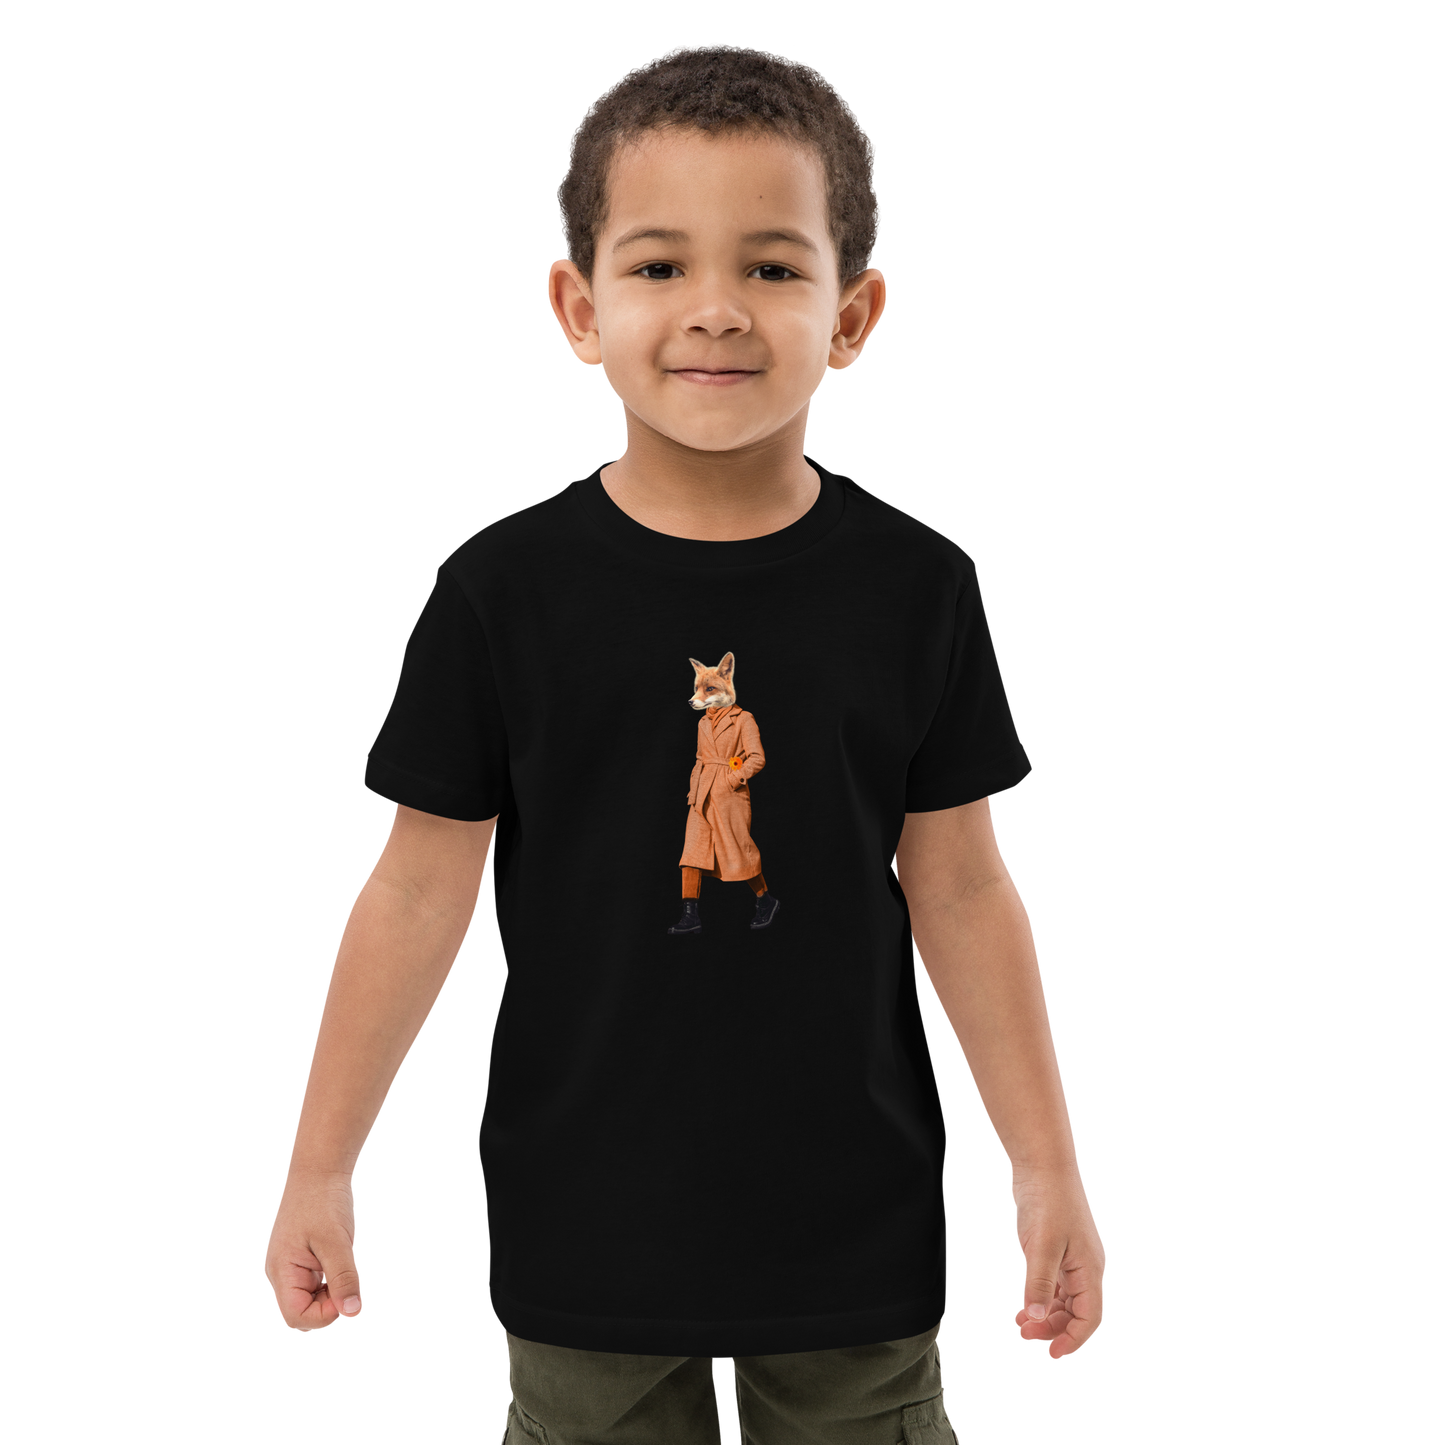 Young boy wearing a Black Anthropomorphic Fox Organic Cotton Kids T-Shirt featuring an Anthropomorphic Fox In a Trench Coat graphic on the chest - Kids' Graphic Tees - Funny Animal T-Shirts - Boozy Fox